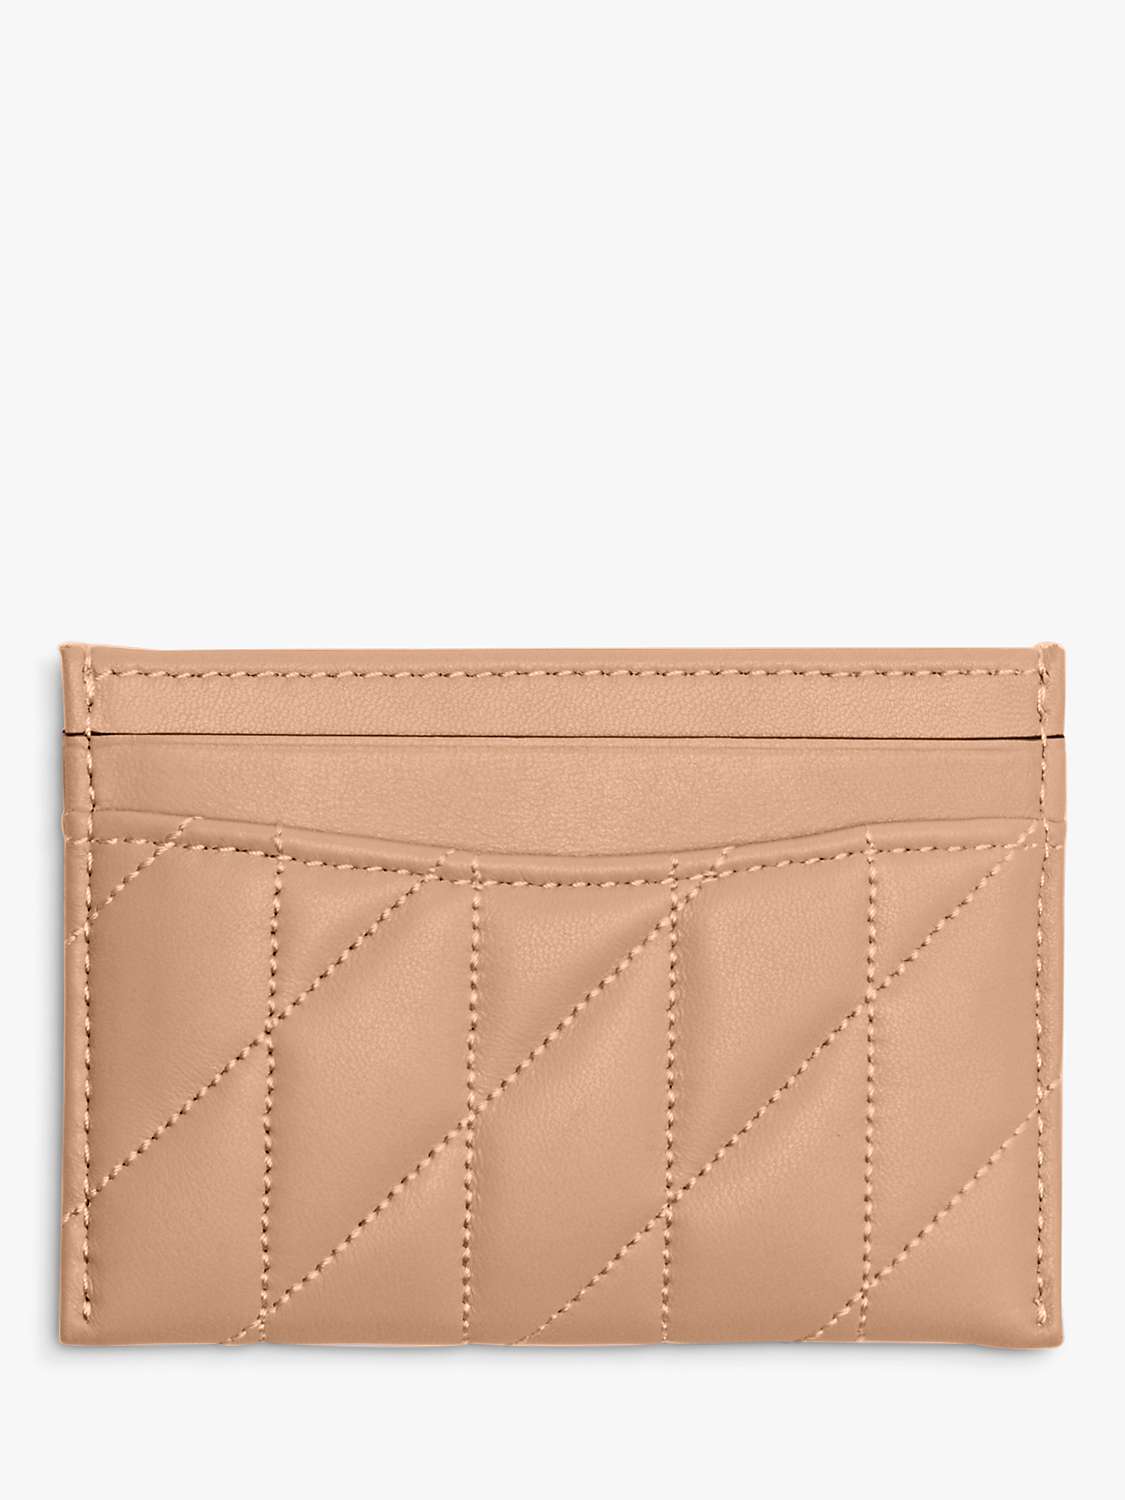 Buy Coach Quilted Leather Card Holder, Buff Online at johnlewis.com